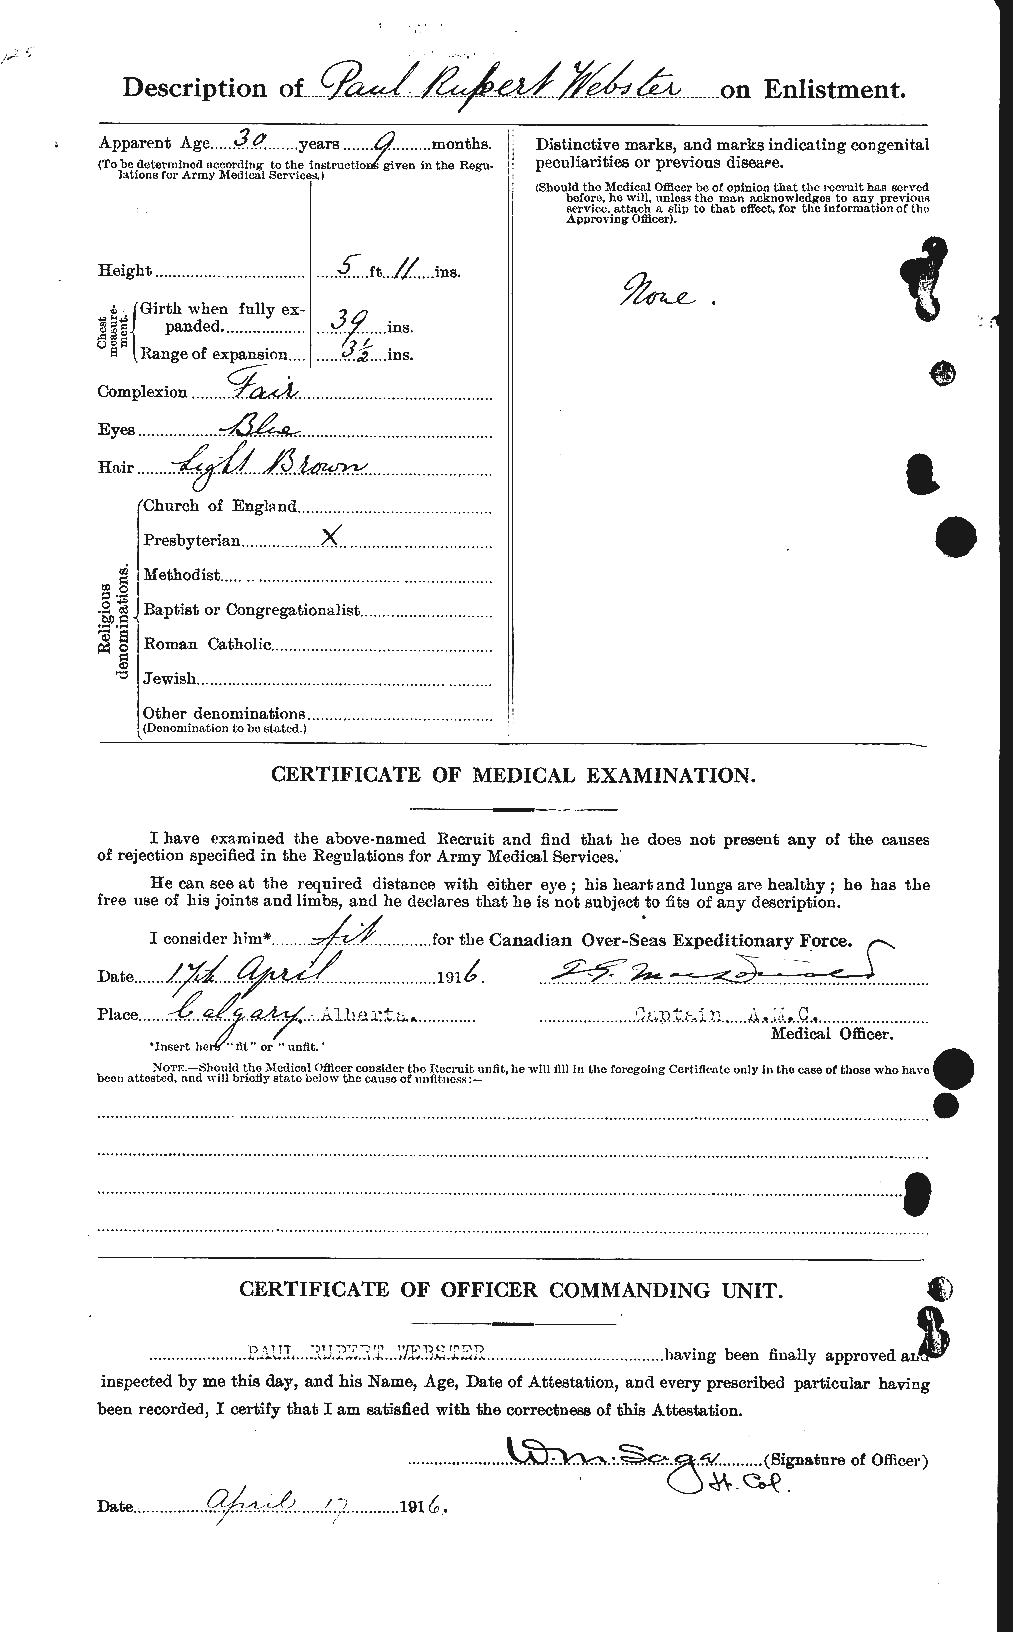 Personnel Records of the First World War - CEF 670530b